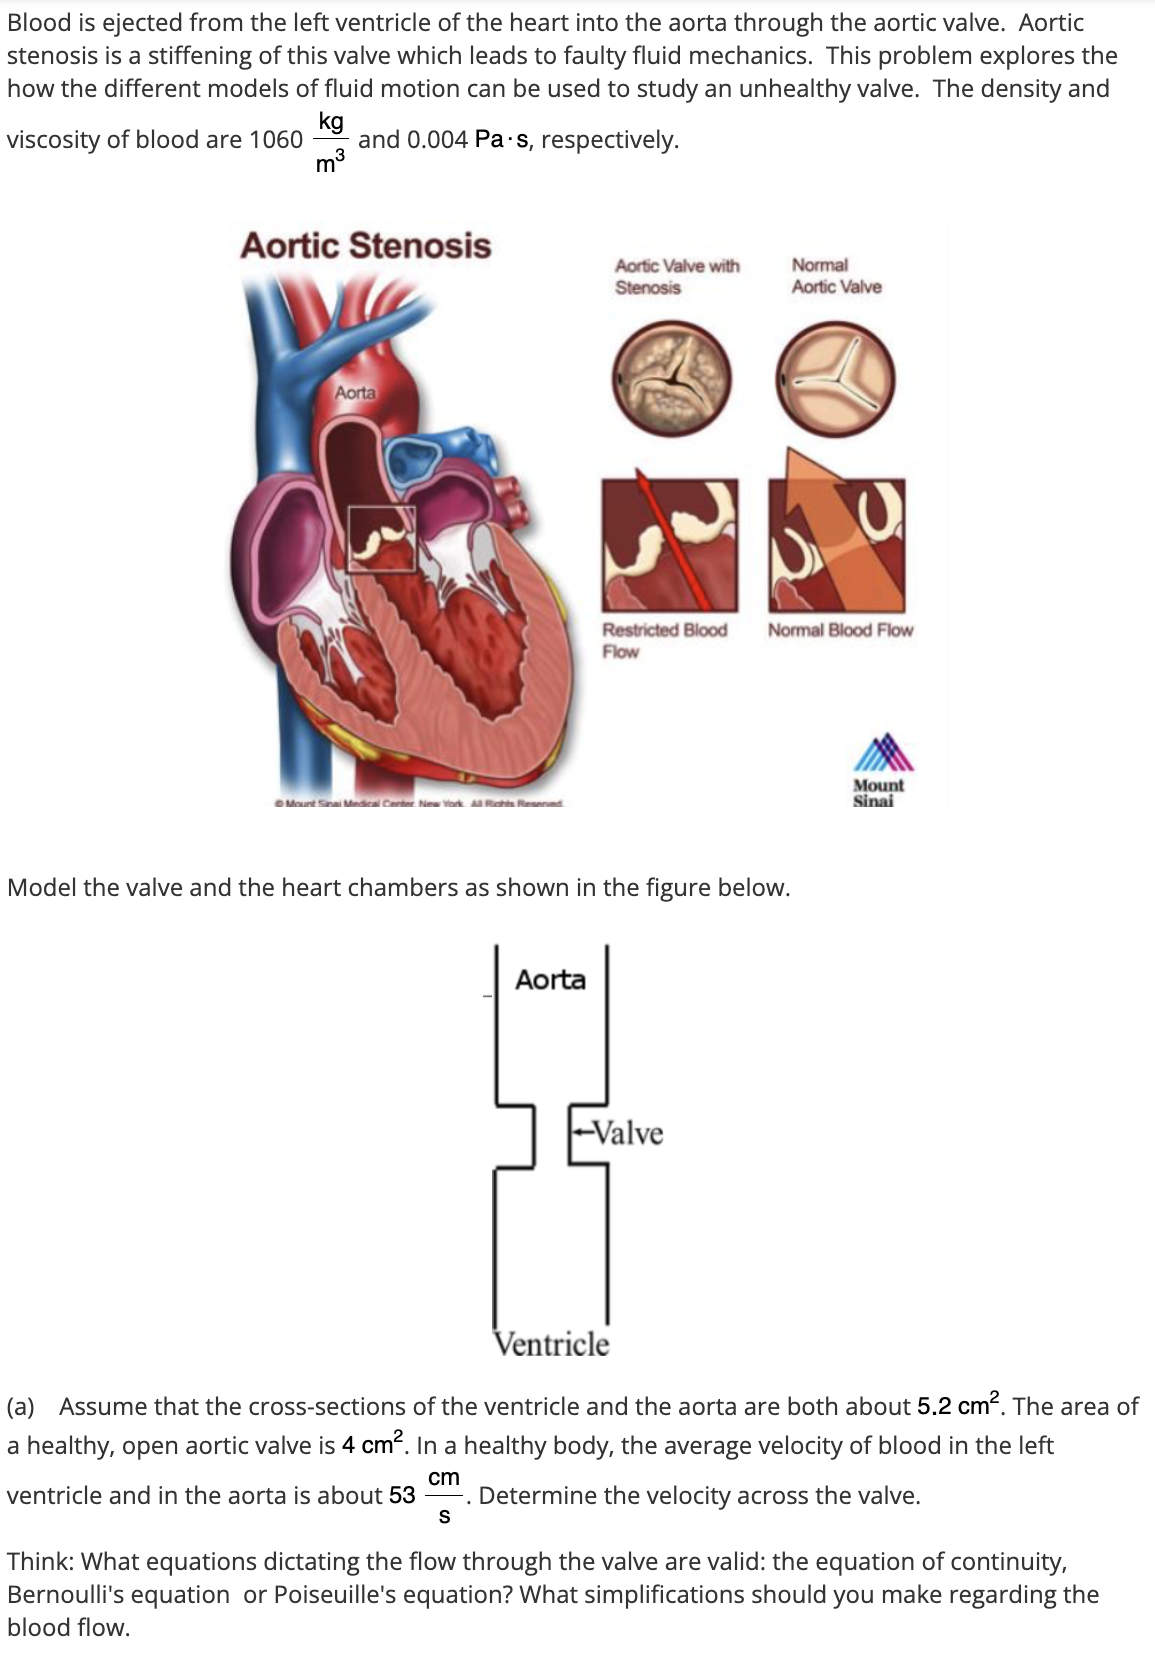 Blood is ejected from the left ventricle of the heart into the aorta through the aortic valve. Aortic
stenosis is a stiffening of this valve which leads to faulty fluid mechanics. This problem explores the
how the different models of fluid motion can be used to study an unhealthy valve. The density and
viscosity of blood are 1060 and 0.004 Pa·s, respectively.
kg
m³
Aortic Stenosis
Aortic Valve with
Stenosis
Normal
Aortic Valve
Aorta
Mount Sinai Medical Center New York Al Rights Reserved
Restricted Blood
Flow
Normal Blood Flow
Model the valve and the heart chambers as shown in the figure below.
Aorta
-Valve
Mount
Sinai
Ventricle
(a) Assume that the cross-sections of the ventricle and the aorta are both about 5.2 cm². The area of
a healthy, open aortic valve is 4 cm². In a healthy body, the average velocity of blood in the left
cm
ventricle and in the aorta is about 53 Determine the velocity across the valve.
S
.
Think: What equations dictating the flow through the valve are valid: the equation of continuity,
Bernoulli's equation or Poiseuille's equation? What simplifications should you make regarding the
blood flow.